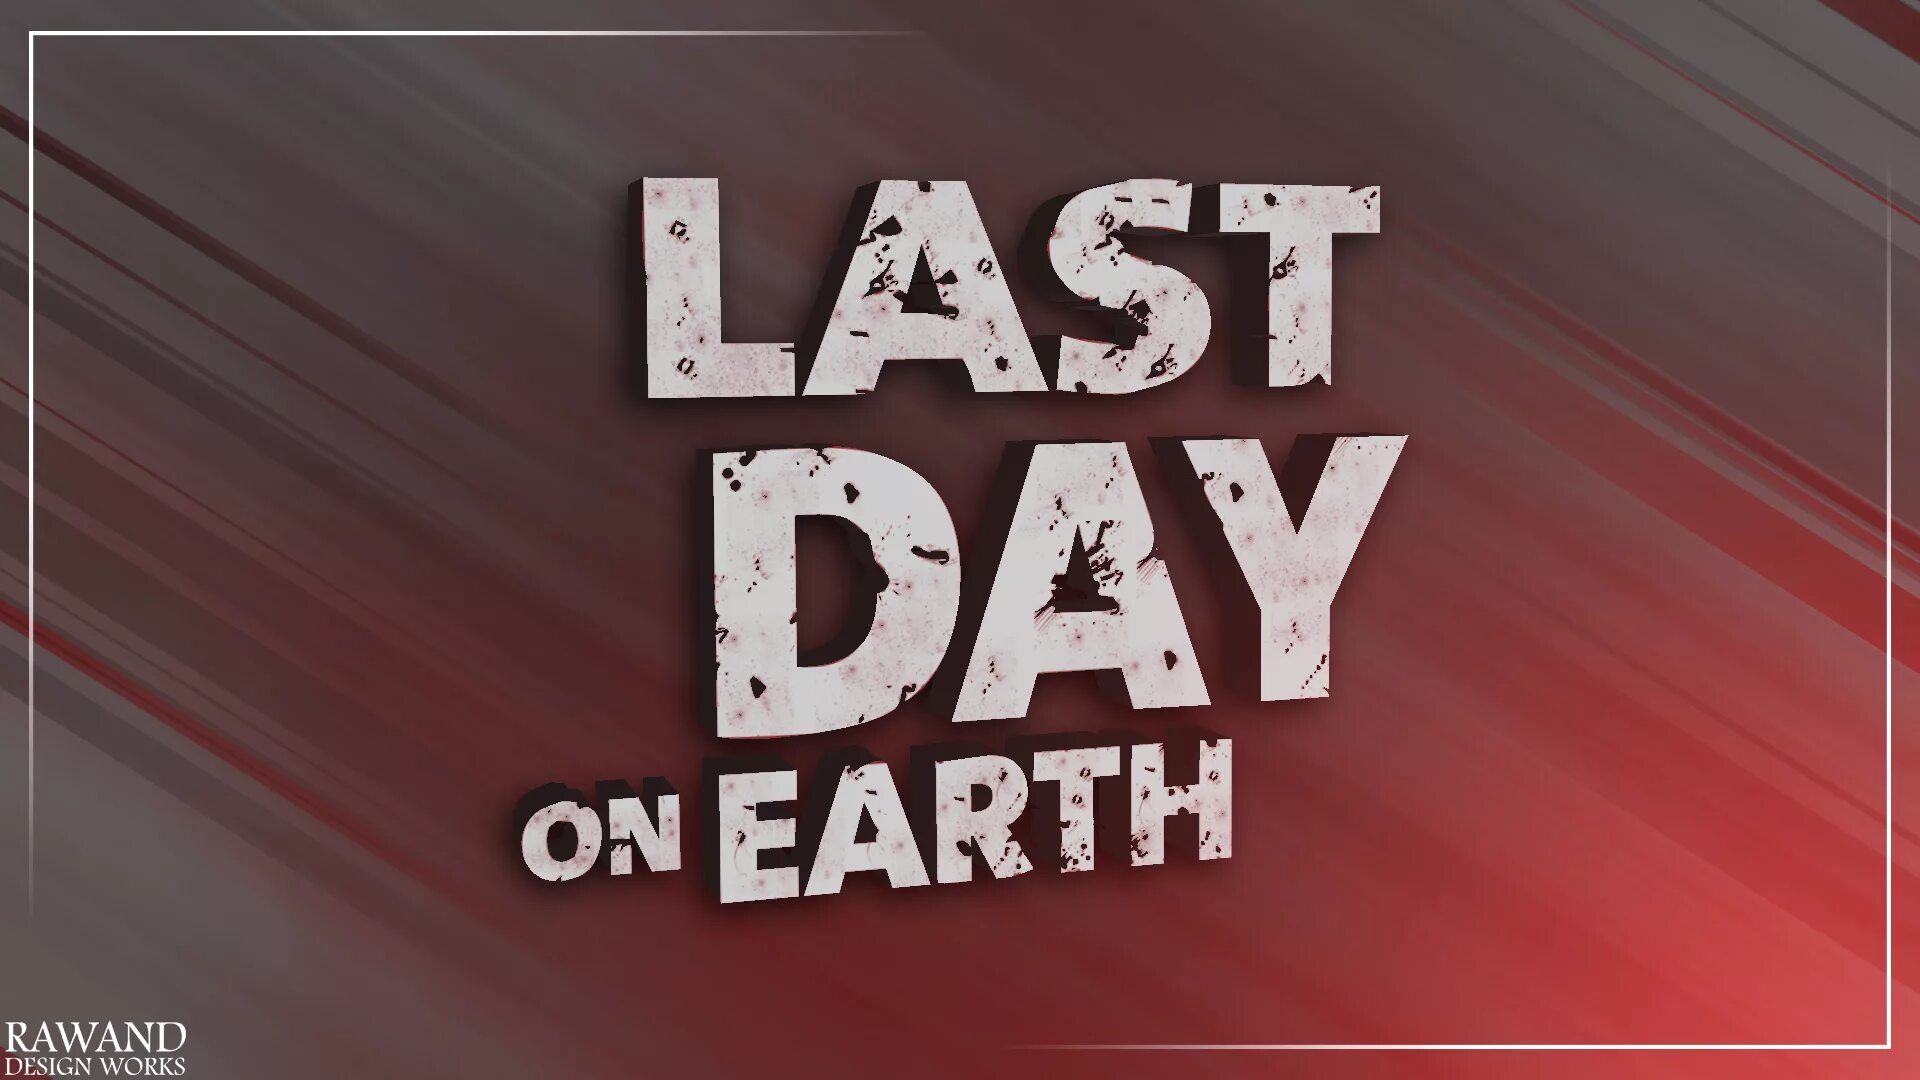 Ласт Дэй. Last Day on Earth: Survival. Last Day надпись. Обои last Day on Earth. Last day here